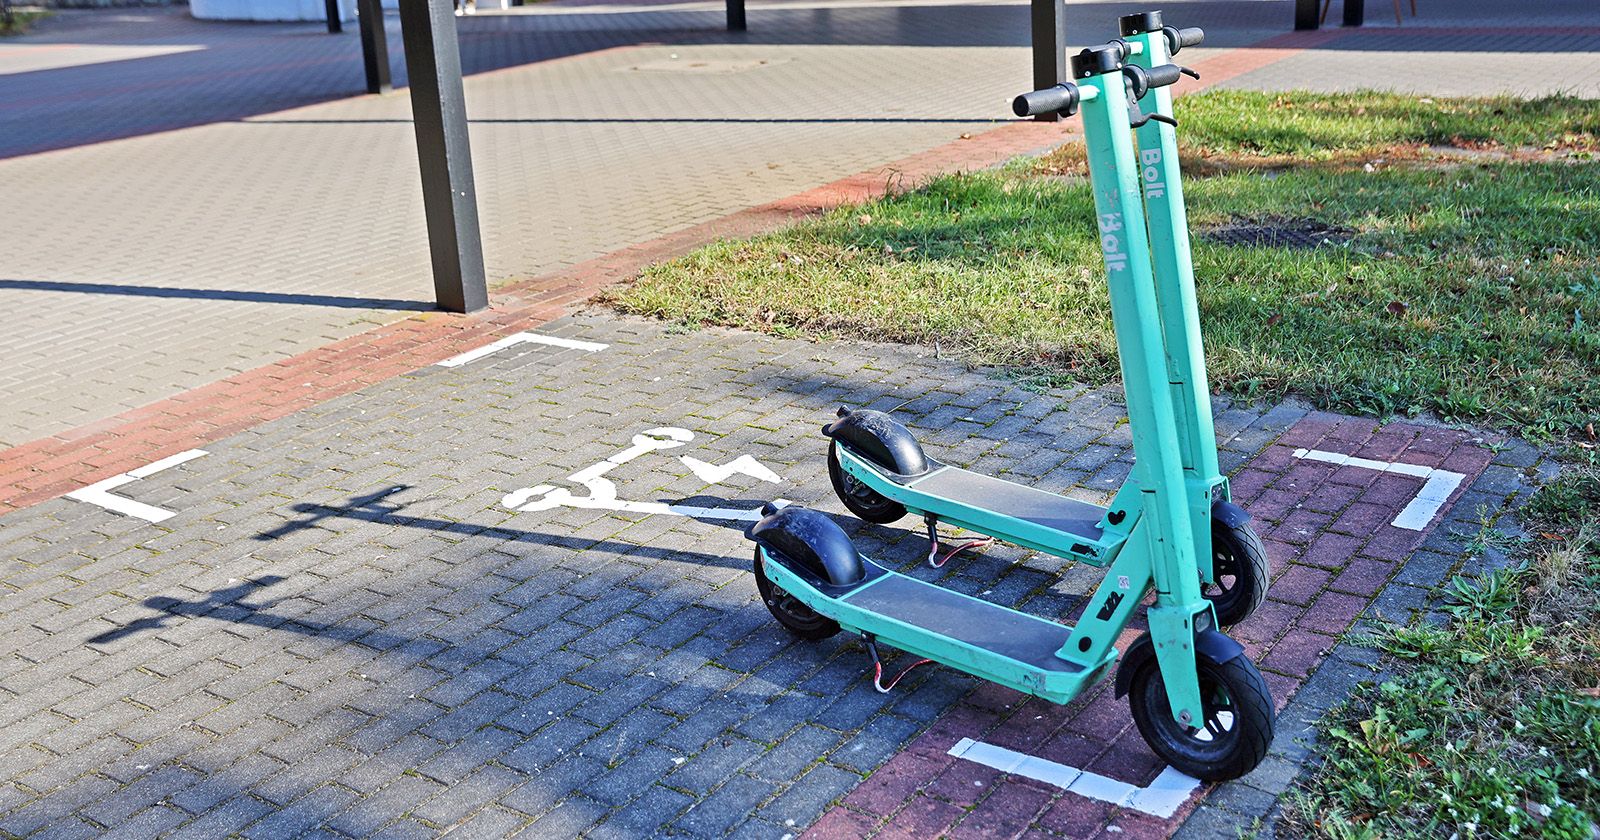 No longer abandoned – new parking spots for electric scooters